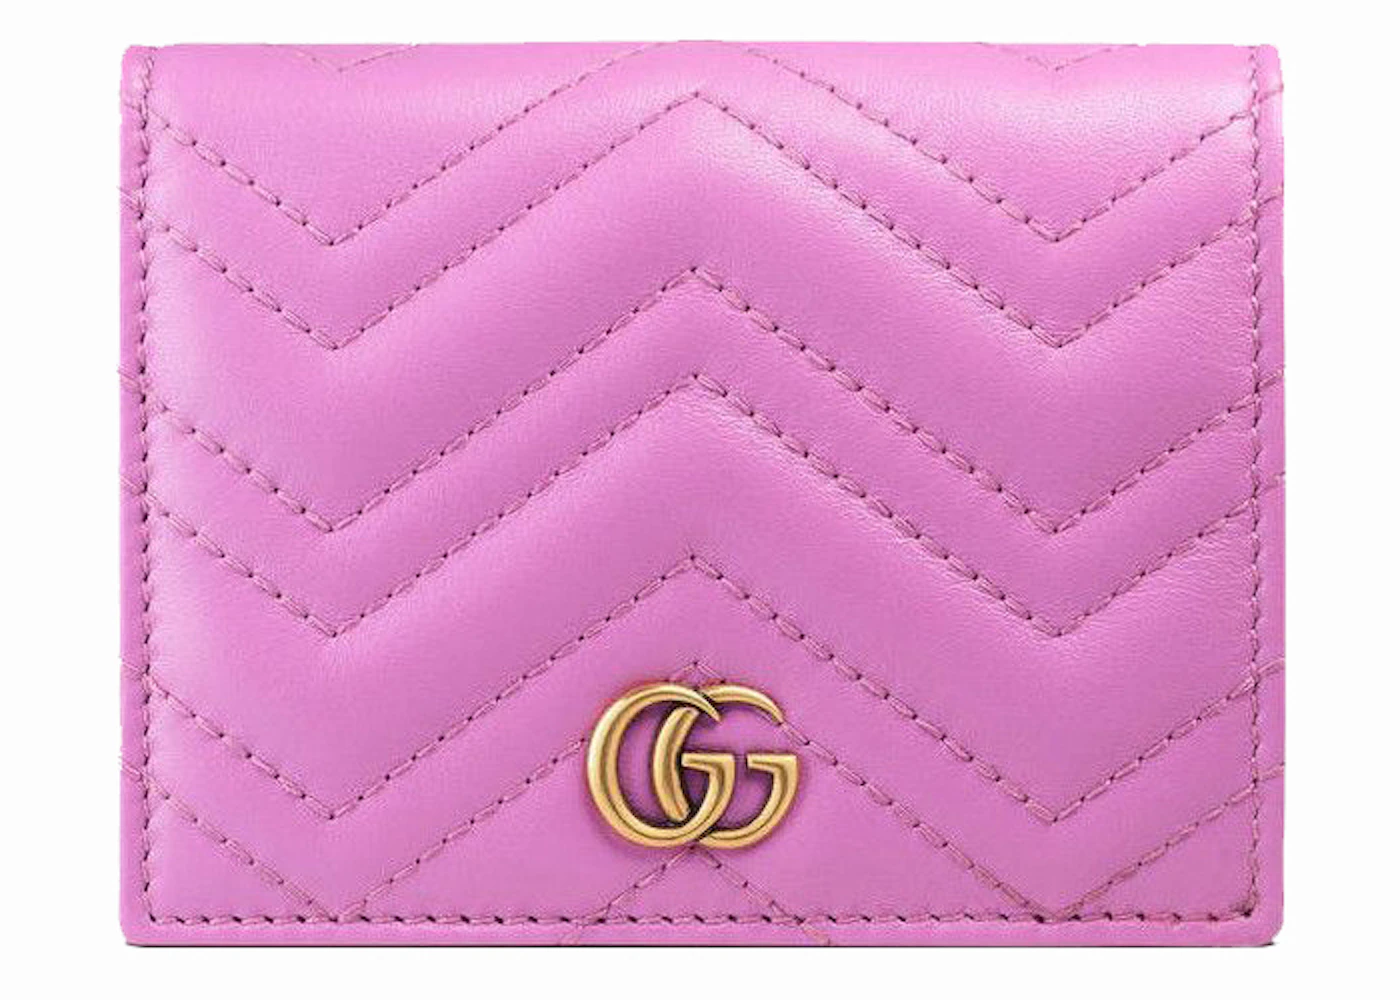 GG Marmont card case wallet in taupe leather